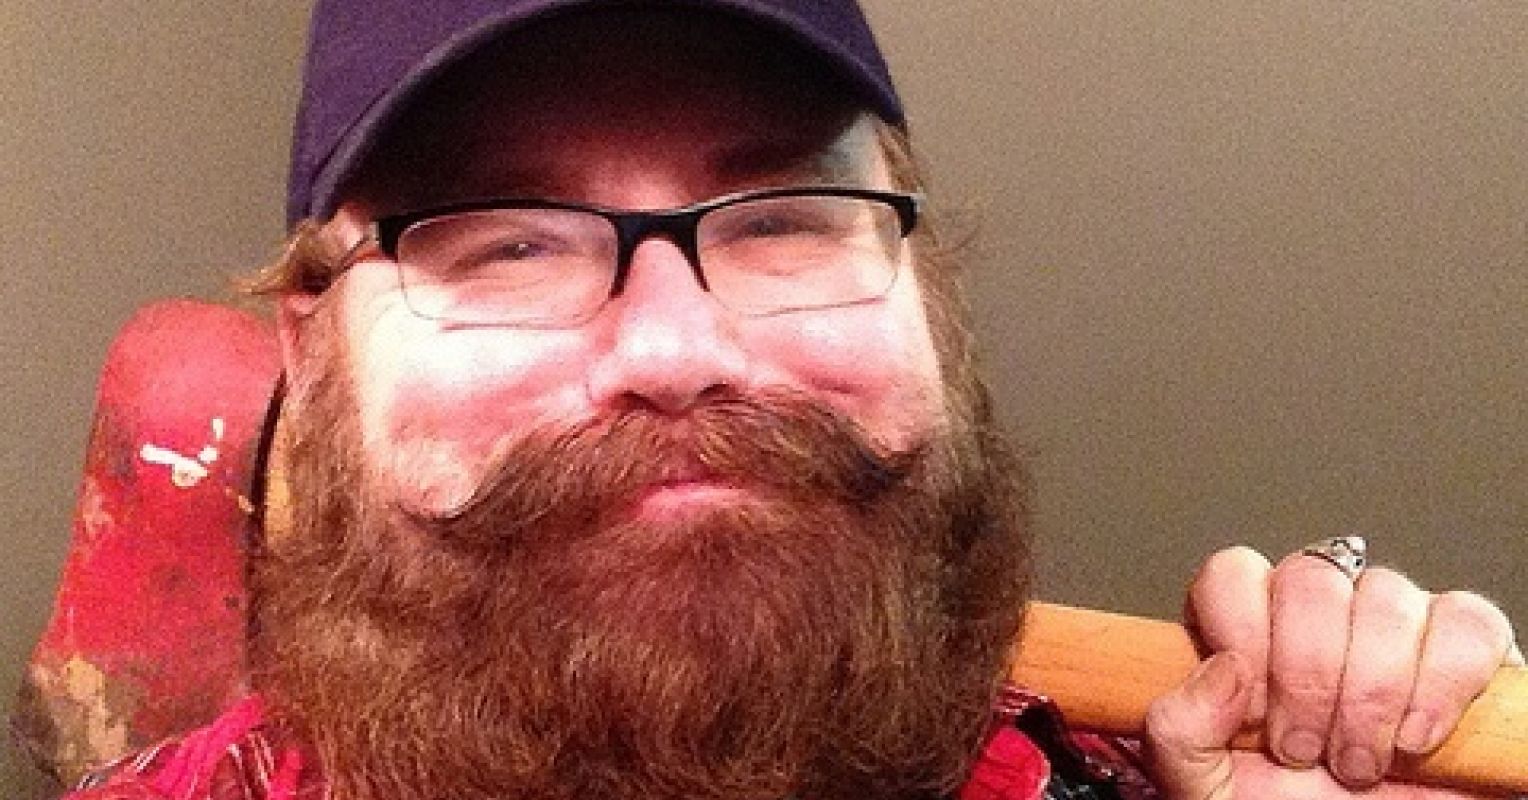 The Worst Male Facial Hair, Ranked by a Woman